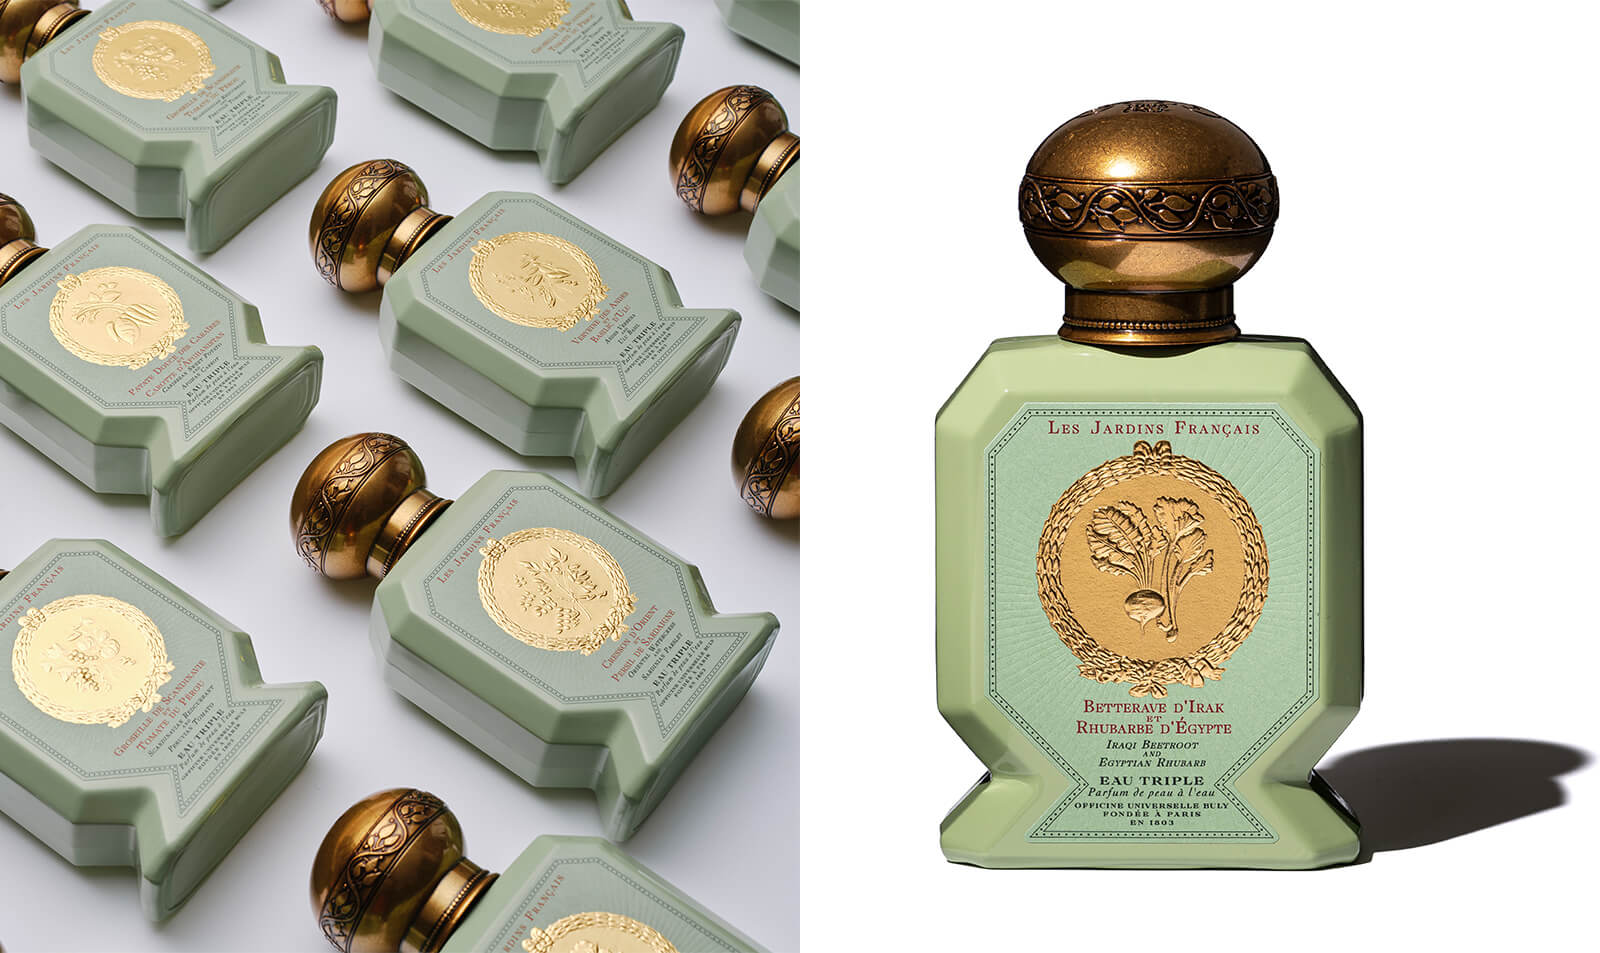 OFFICINE UNIVERSELLE BULY New Fragrance